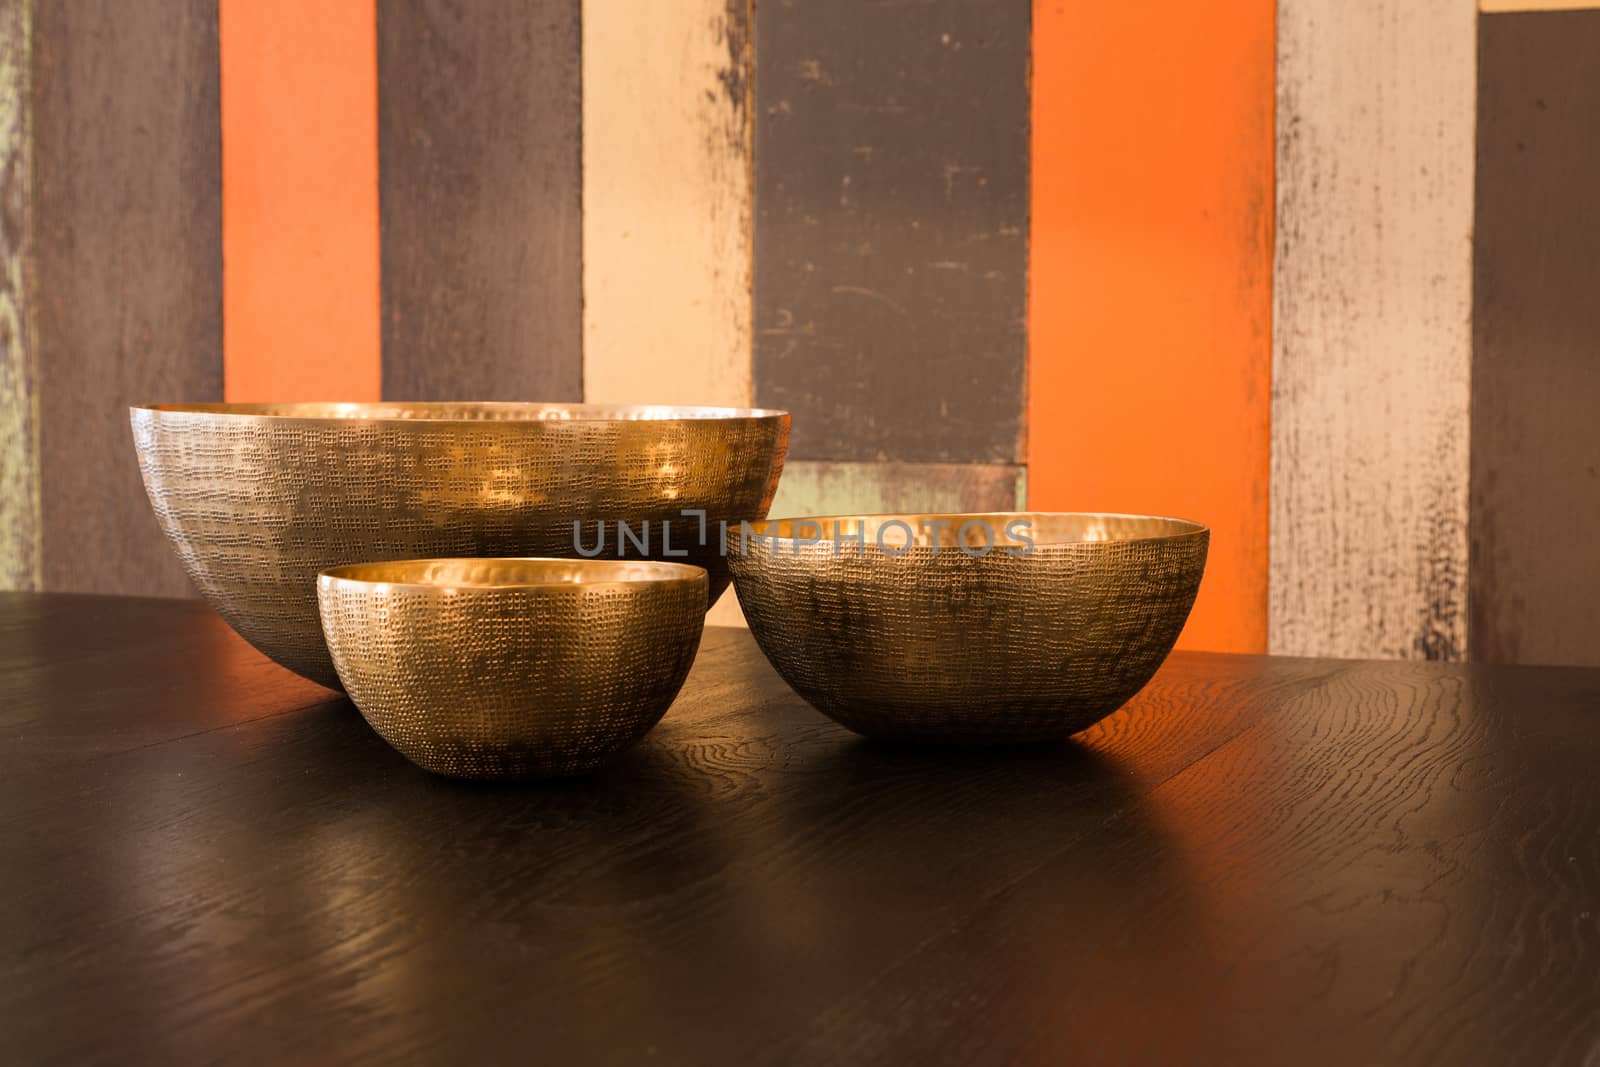 Three empty decorated metal bowls on a table